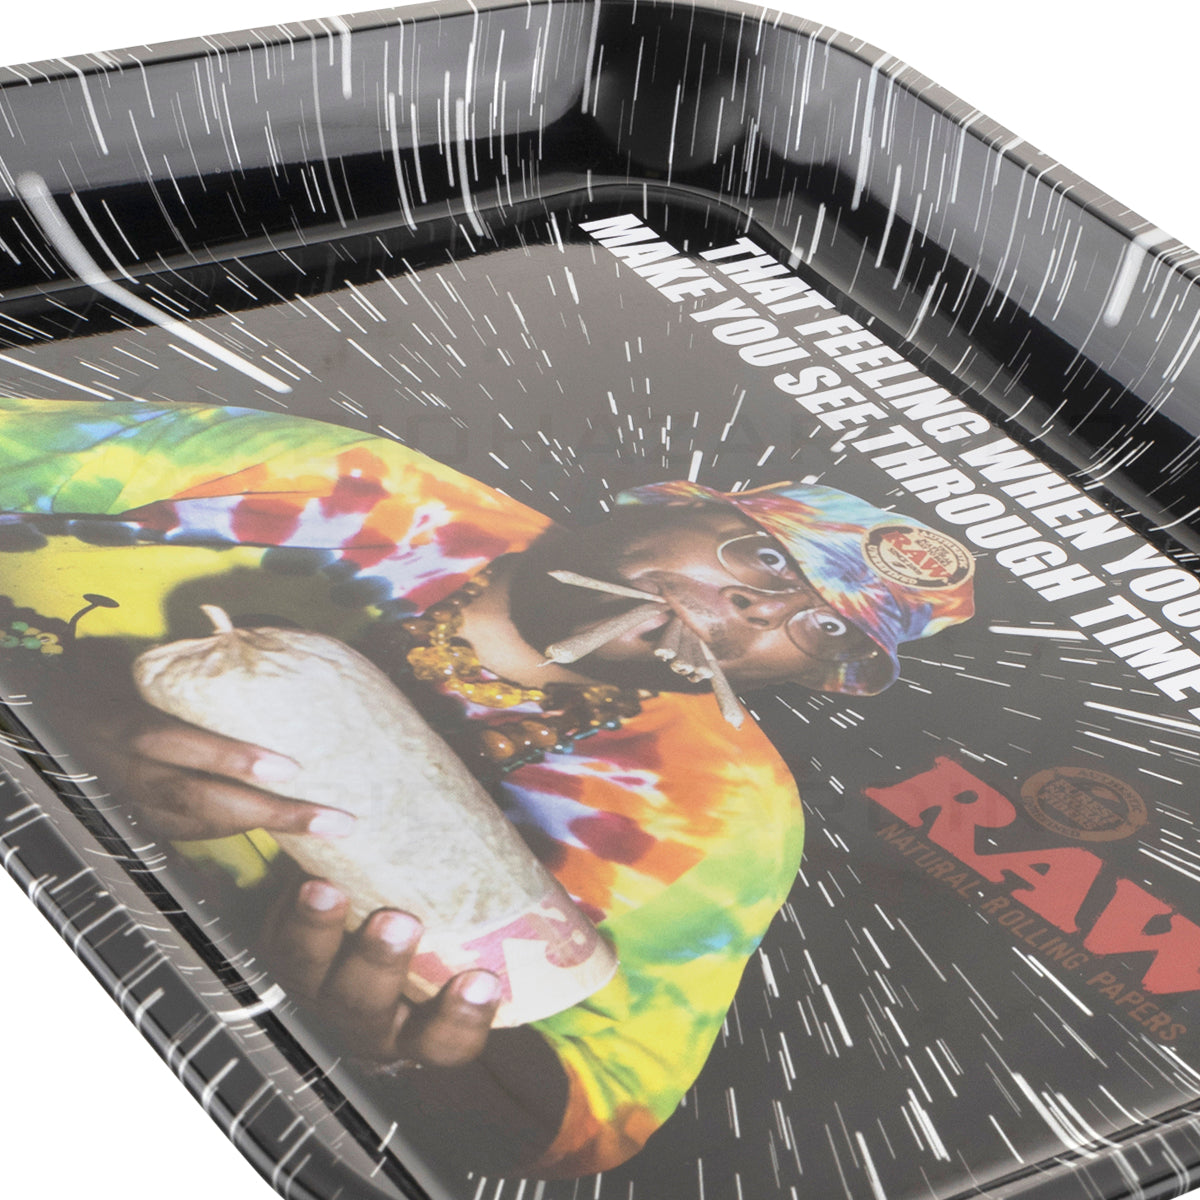 Raw® | Rolling Tray - OPPS | 13in x 11in - Large - Metal Rolling Tray Raw   